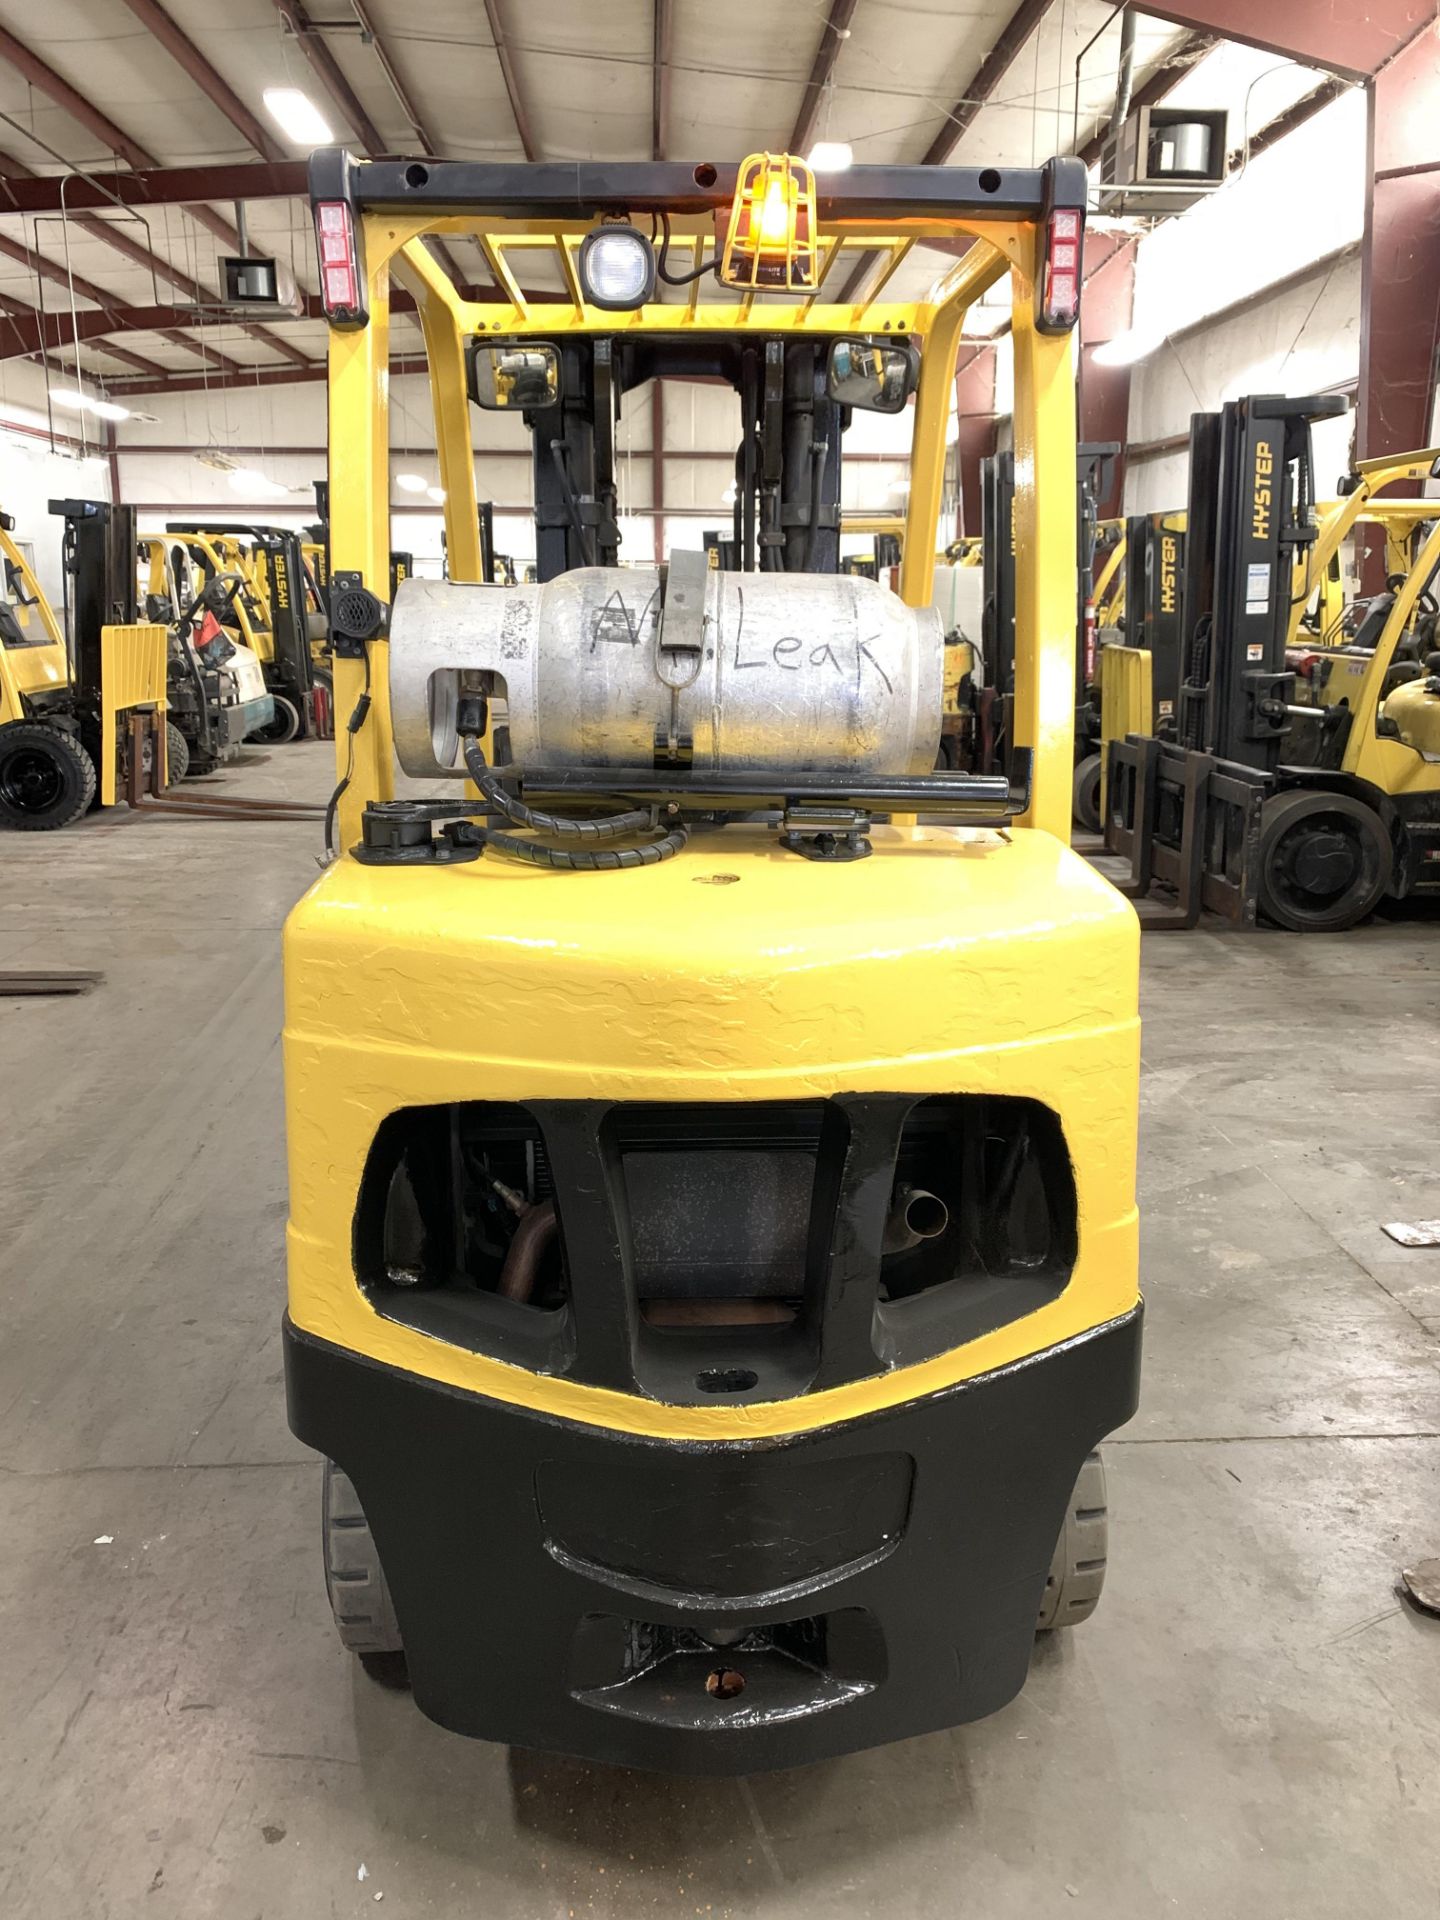 *LOCATED OHIO* 2013 HYSTER 8,000-LB. CAPACITY FORKLIFT, MODEL: S80FT, LPG, 185” Lift, SIDESHIFT - Image 4 of 5